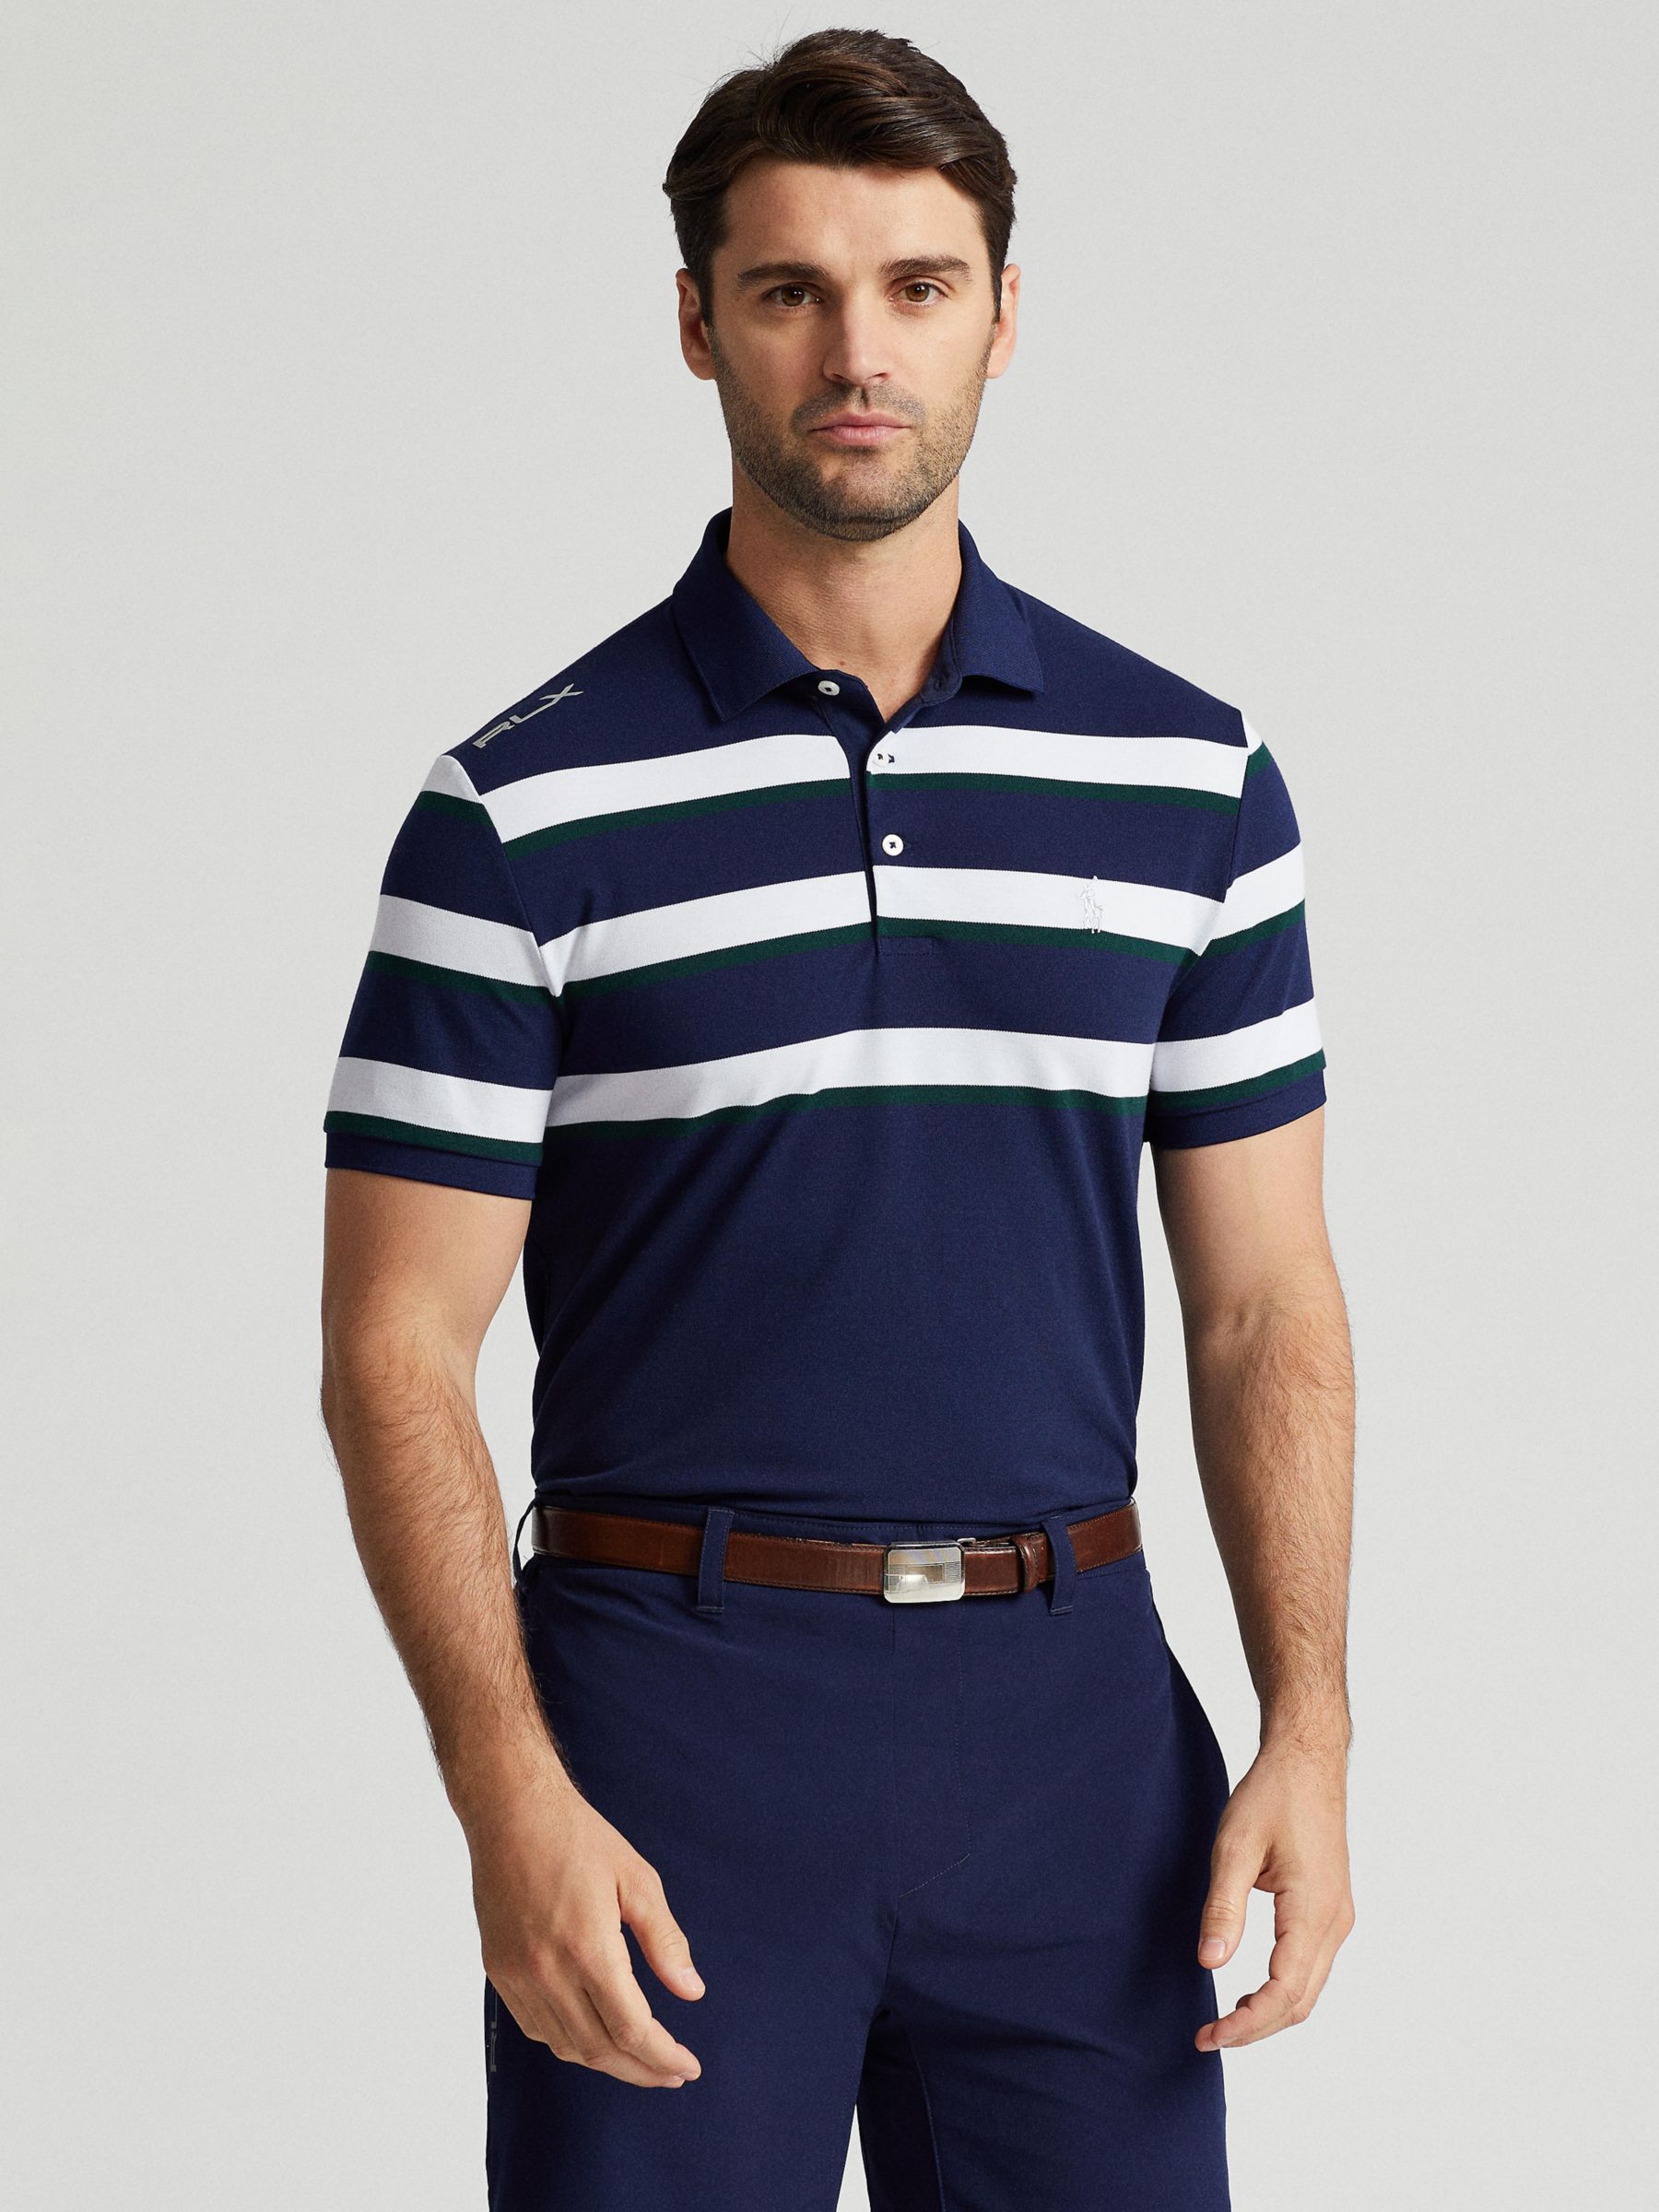 Polo Golf by Ralph Lauren Polo Shirt, French Navy at John Lewis